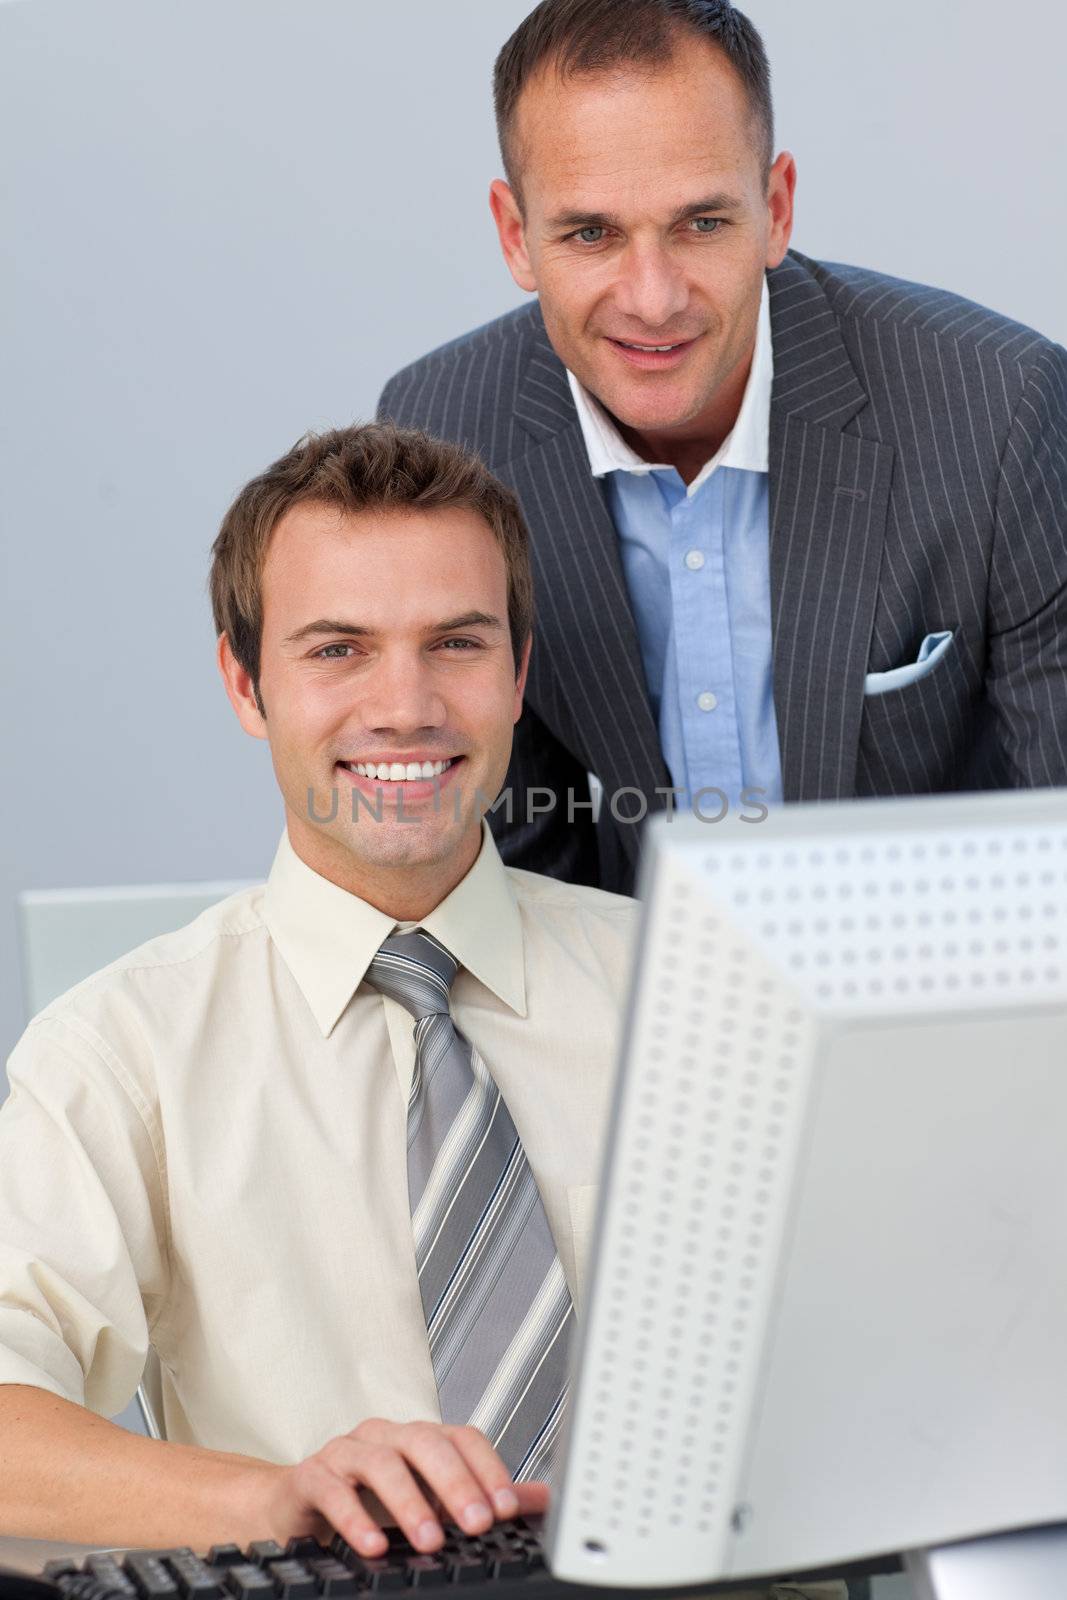 Attractive manager checking his employee's work in the office